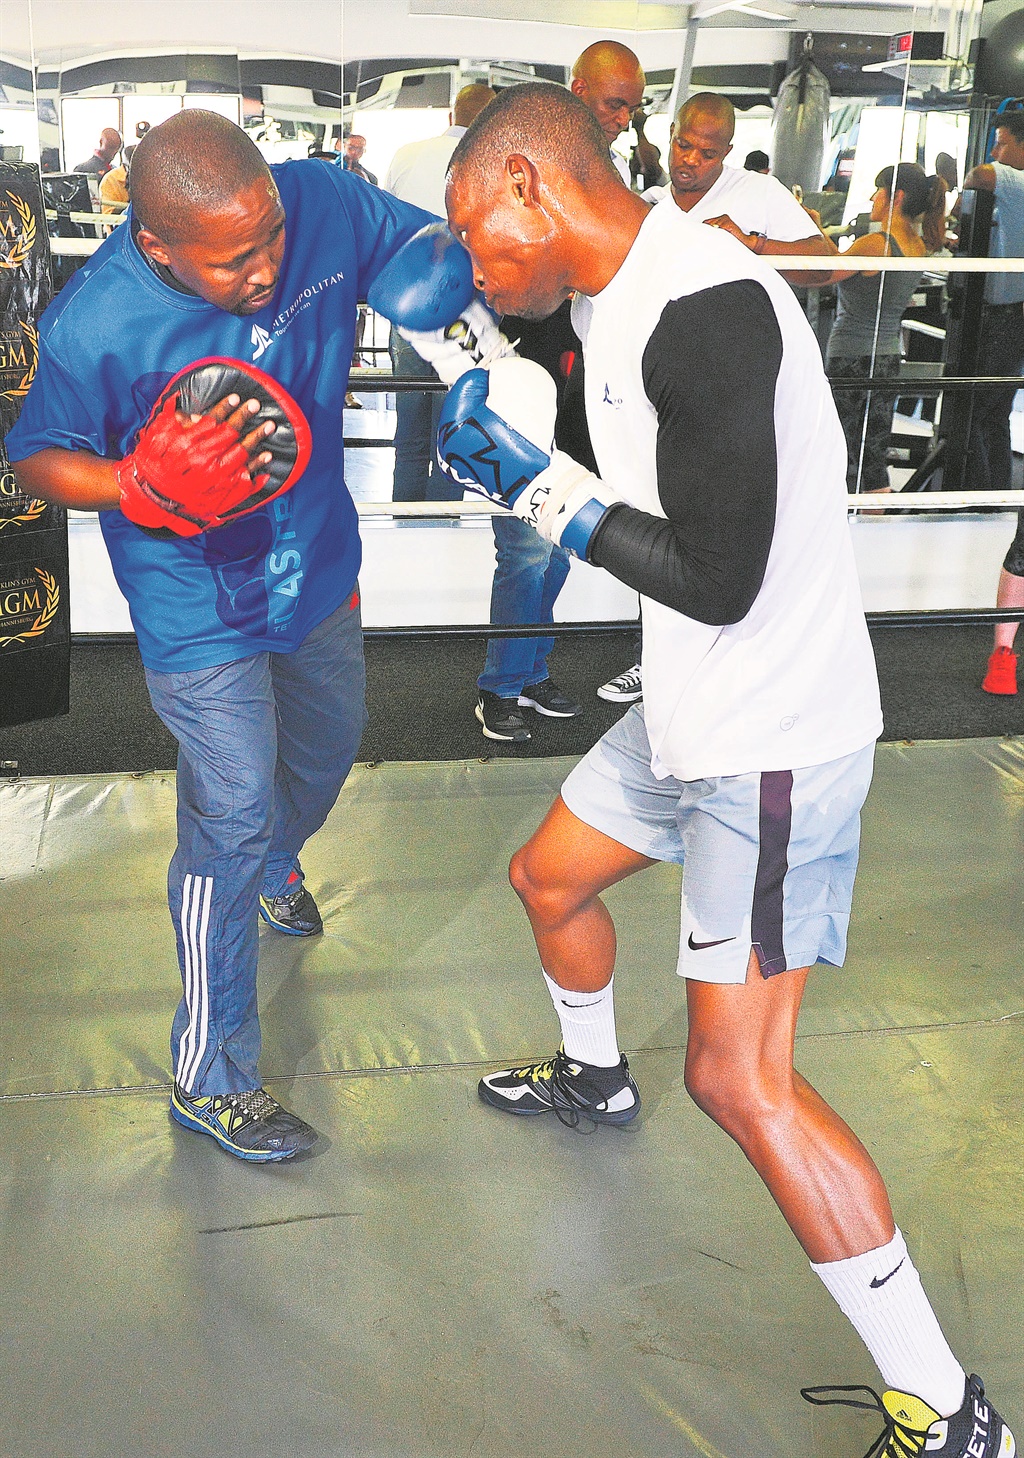 Credible boxer Zolani Tete sparring with his trainer Phumzile Makhila